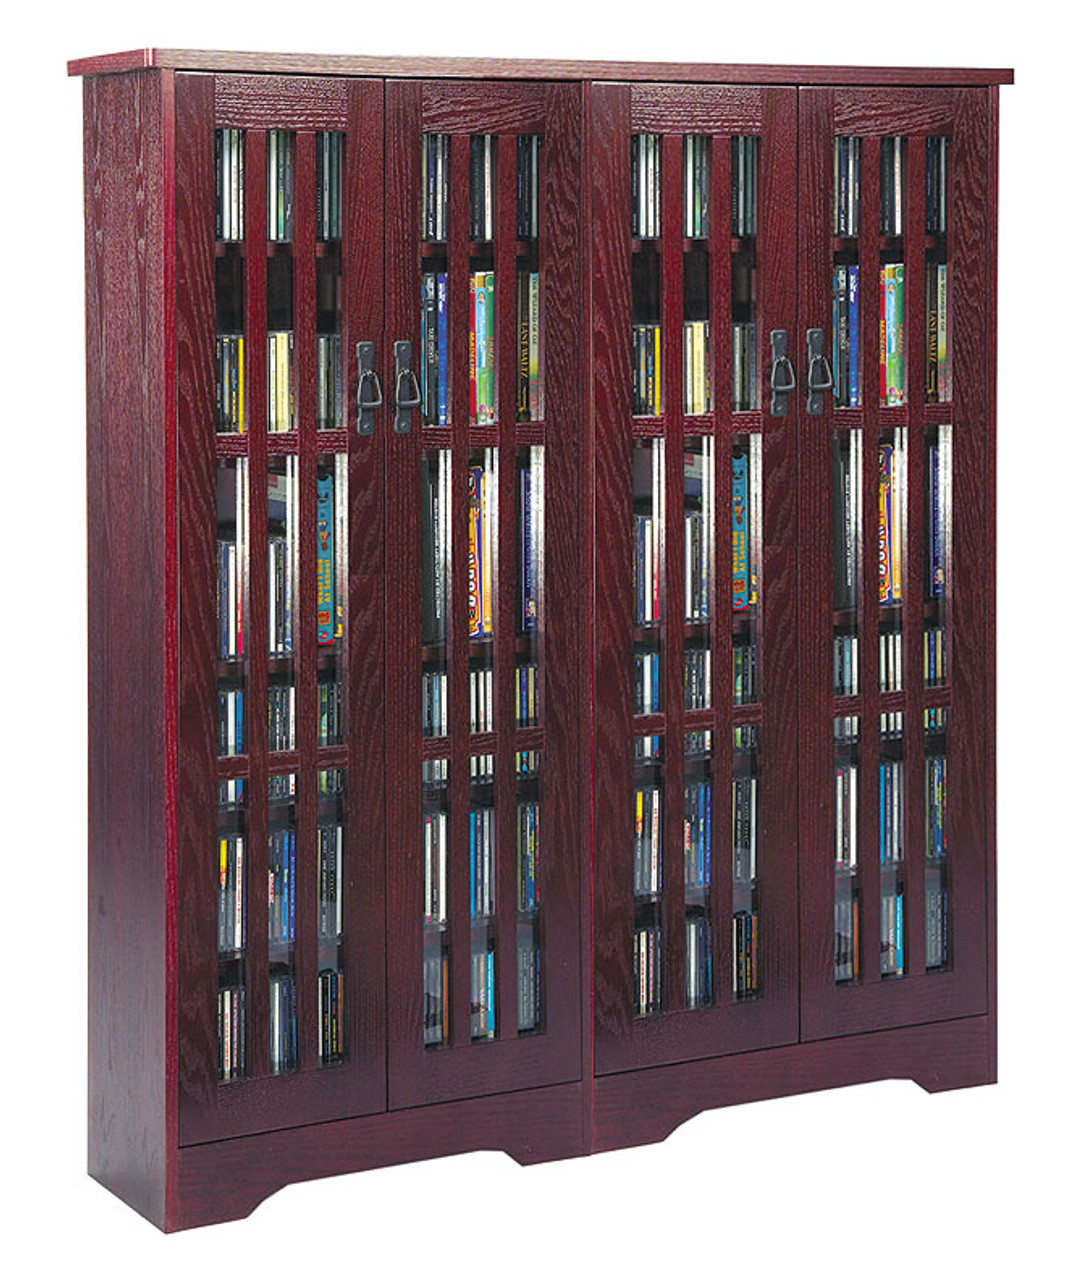 62 Double Mission Cd Dvd Cabinet W Tempered Glass Doors Dark Cherry